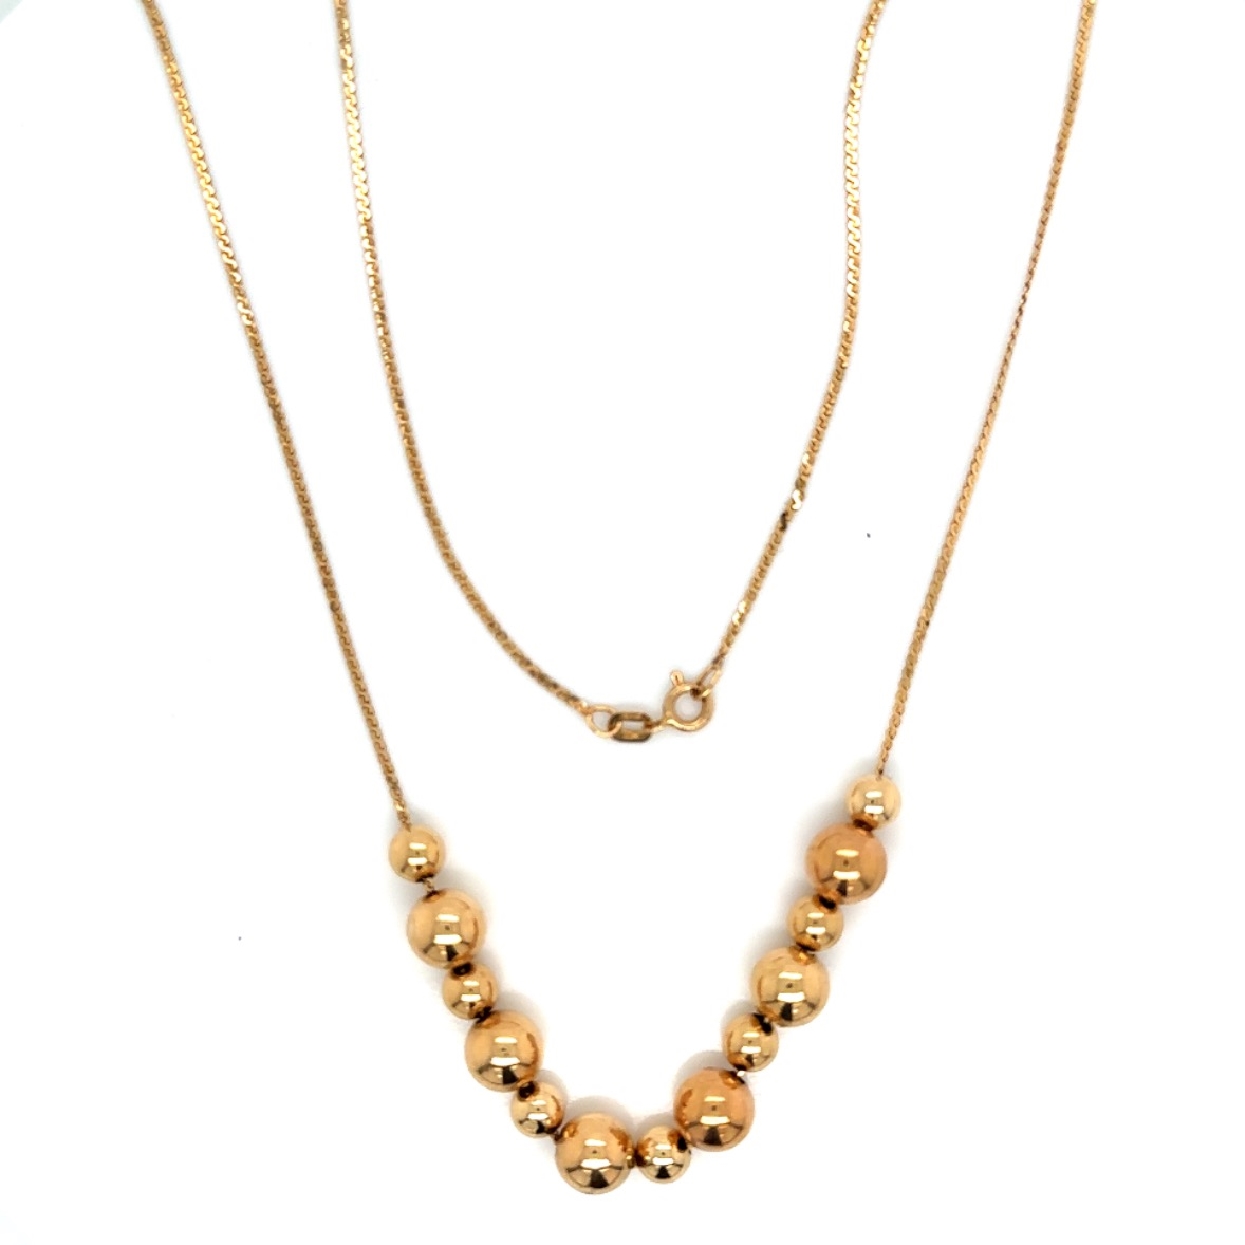 14K Yellow Gold Add-a-Bead Necklace 20 Inches